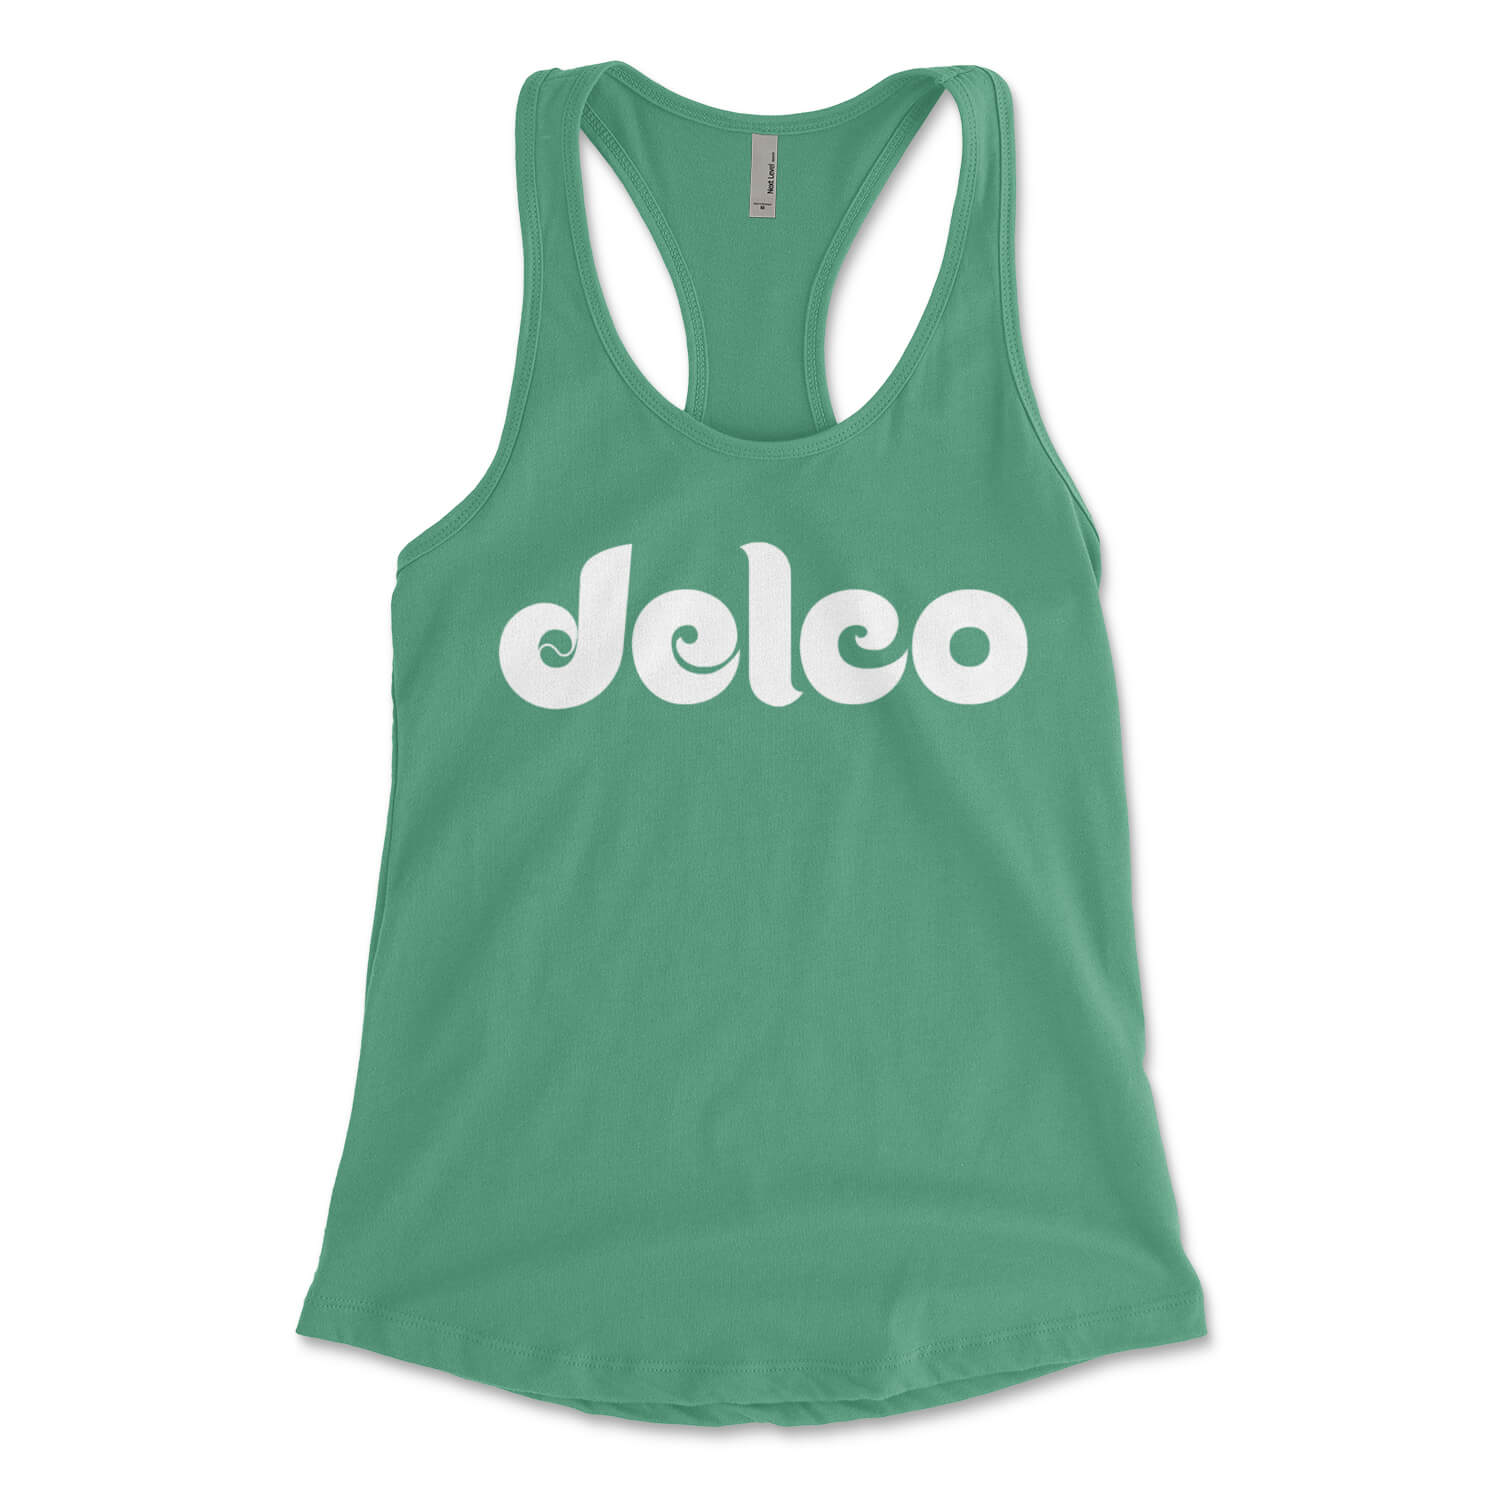 Delco heather green womens racerback tank top from Phillygoat